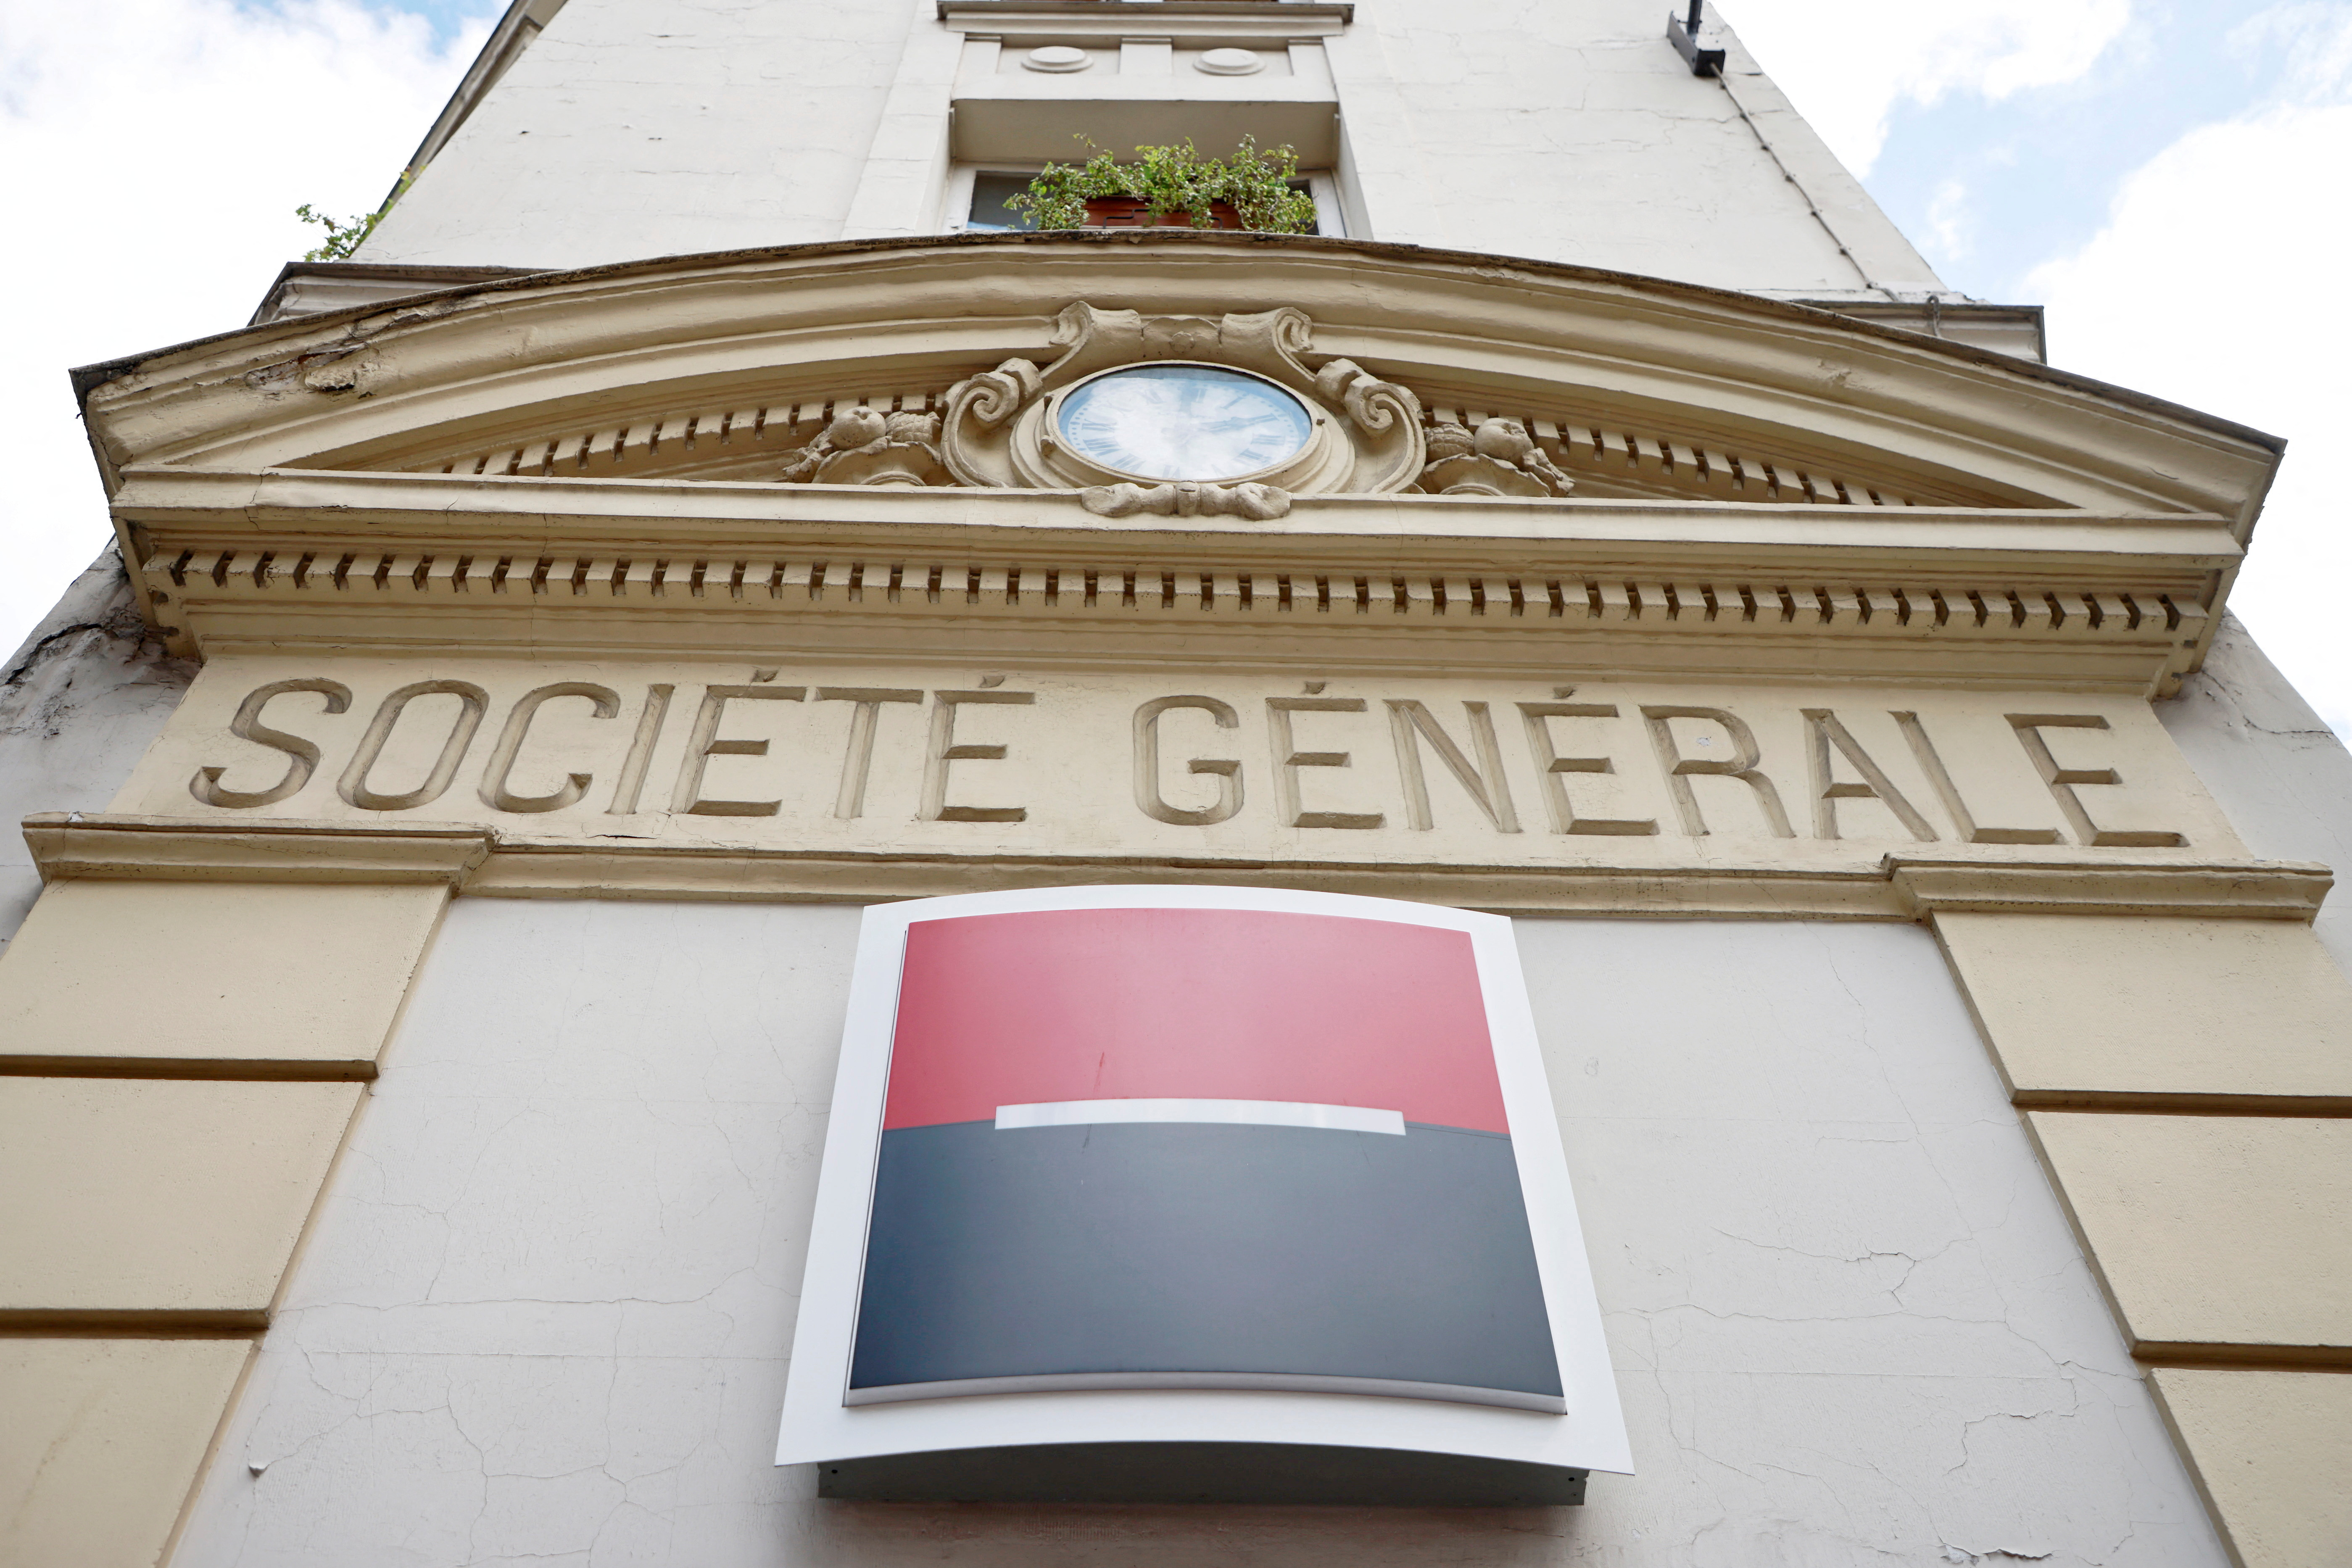 A Societe Generale sign is seen outside a bank building in Paris